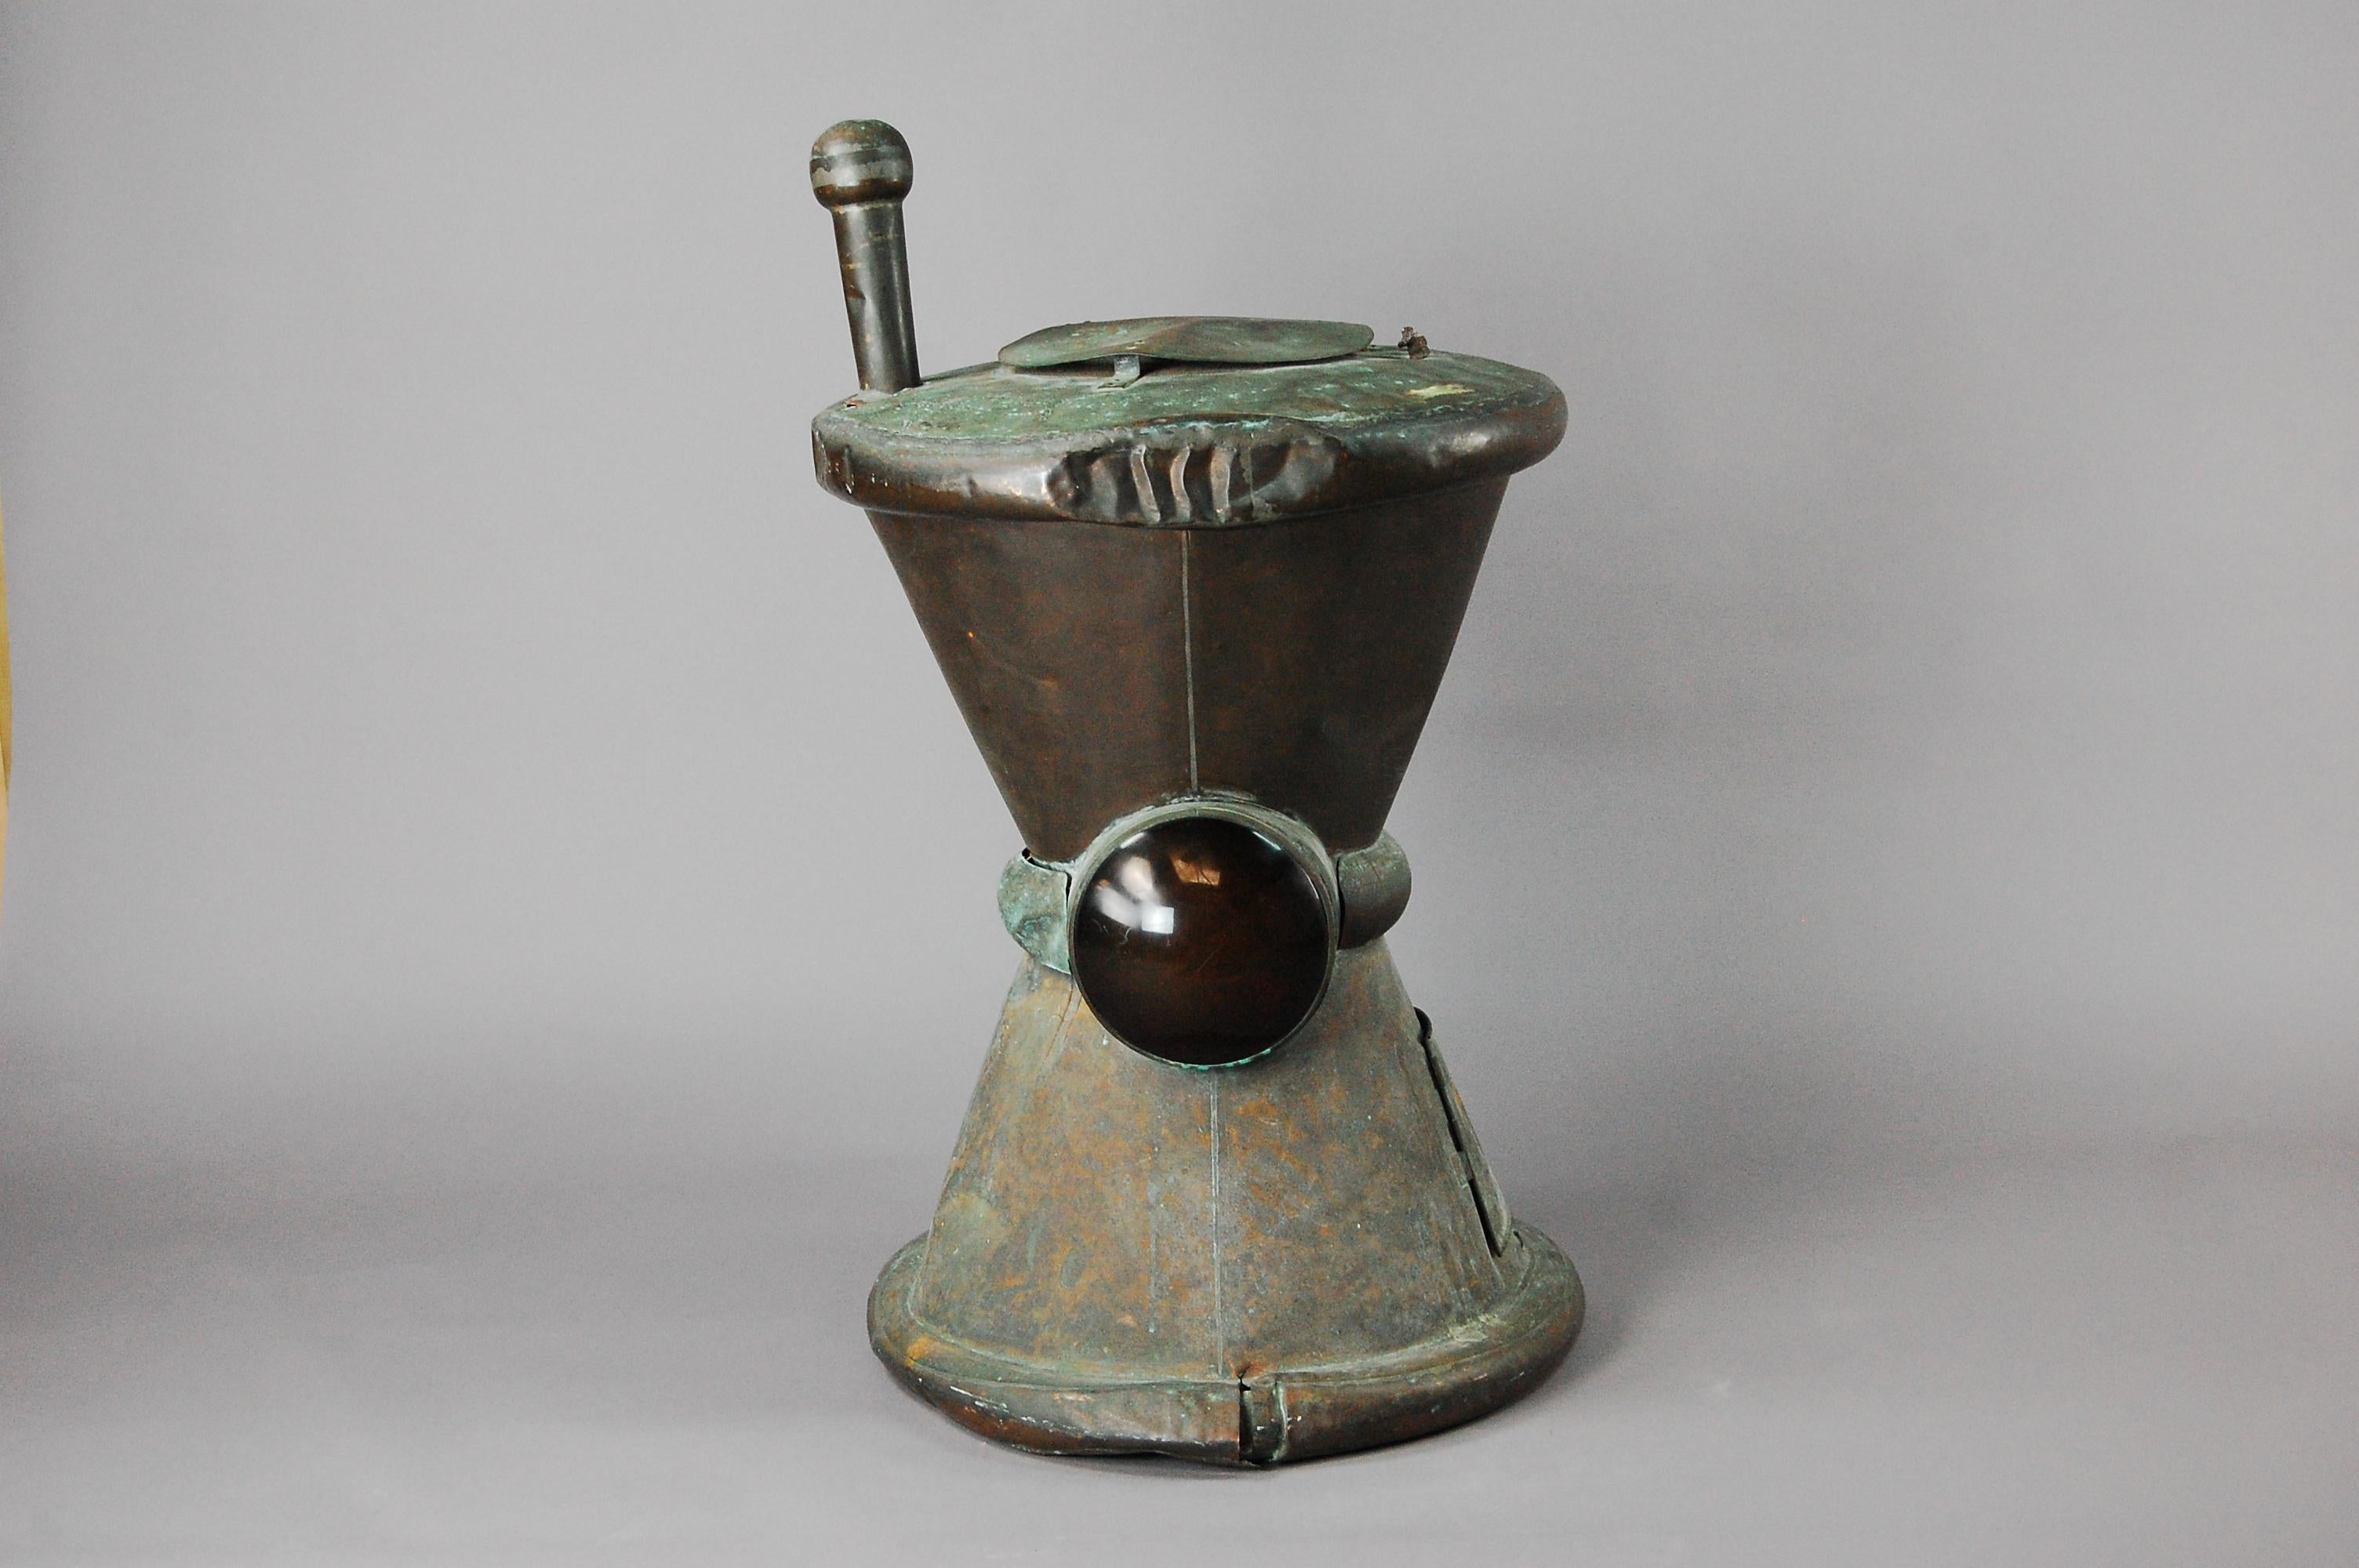 Wonderful early 20th century copper pharmacy or chemist trade sign in the form of a pestle and mortar, oxidization and signs of natural verdigris showing, red lenses on each side would have been lit by gas lamp to make the sign more prominent and